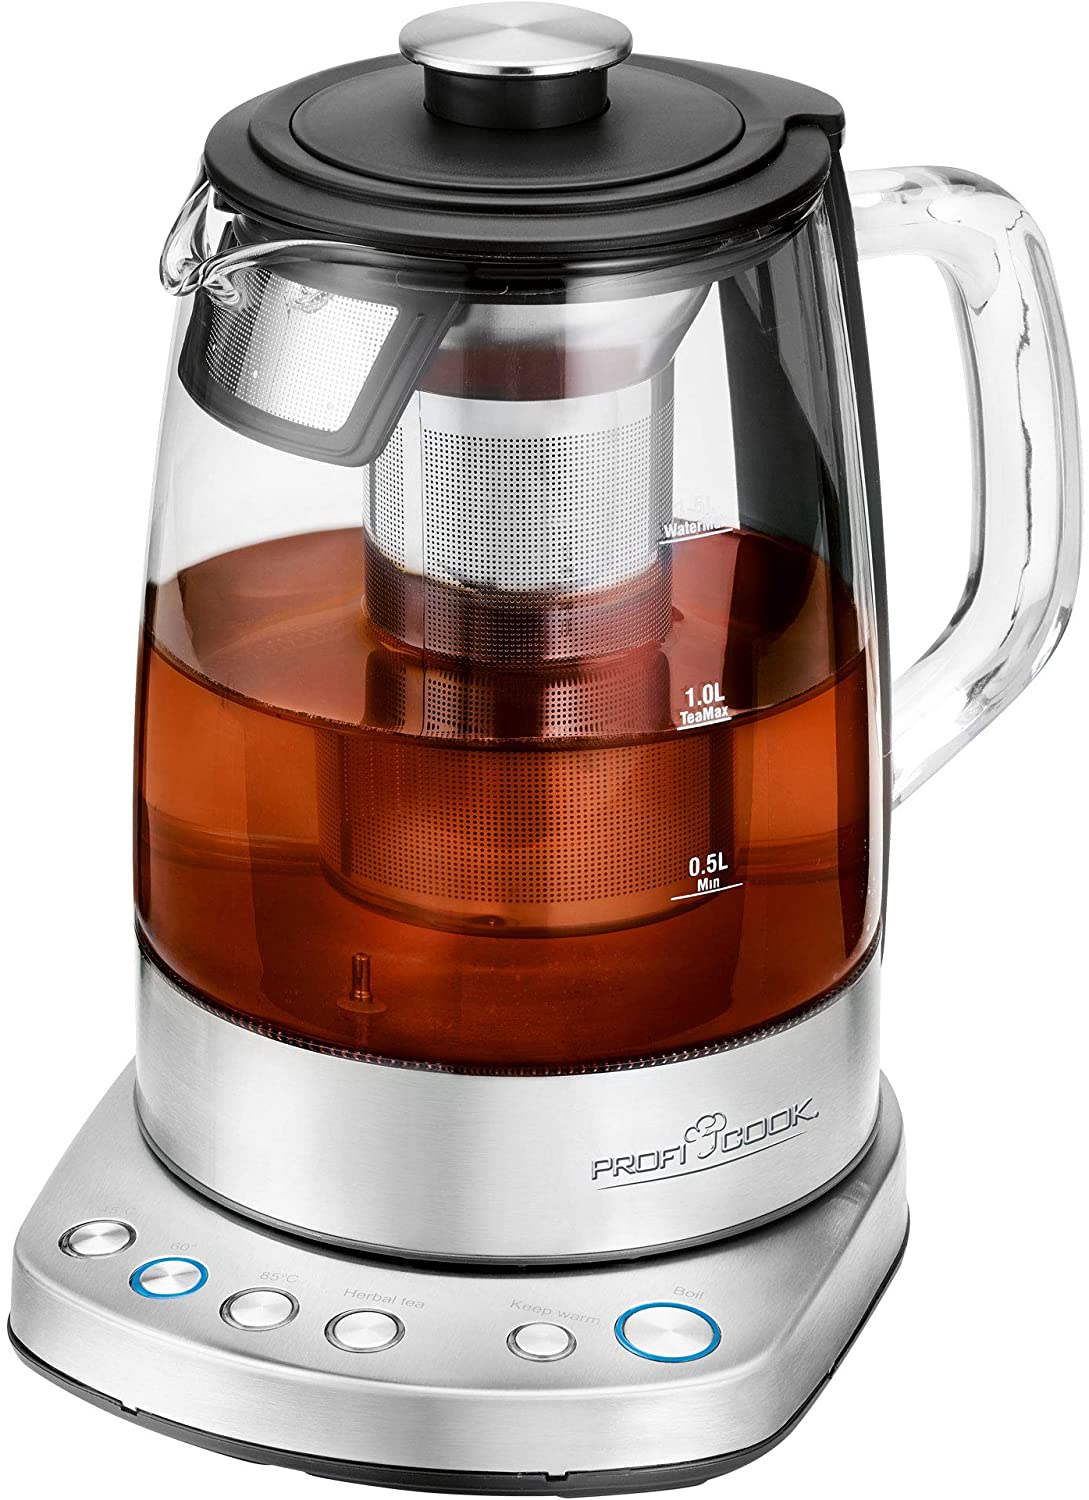 Profi Cook ProfiCook PC-WKS 1167 G, 2in1 tea and water kettle, free app, programmable temperature control, glass / stainless steel housing, 1.5 litres.